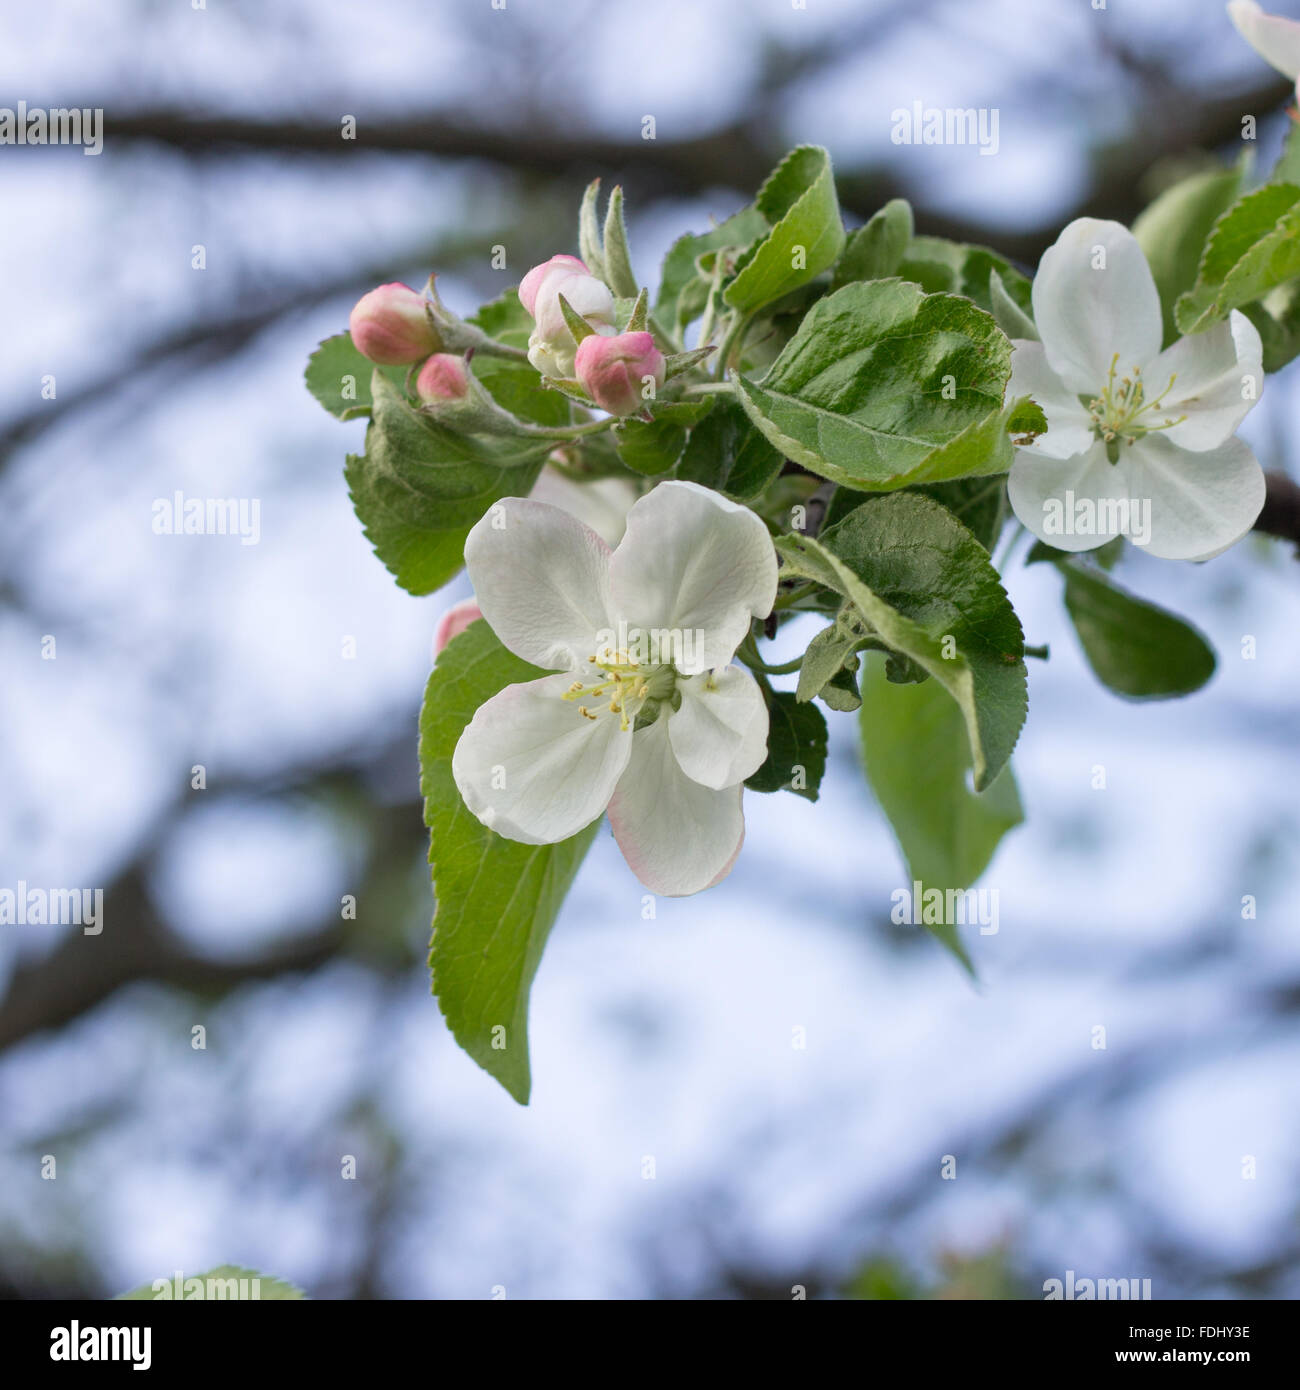 Blossoming apple tree twig with white flowers. Spring fruit tree blooming background Stock Photo